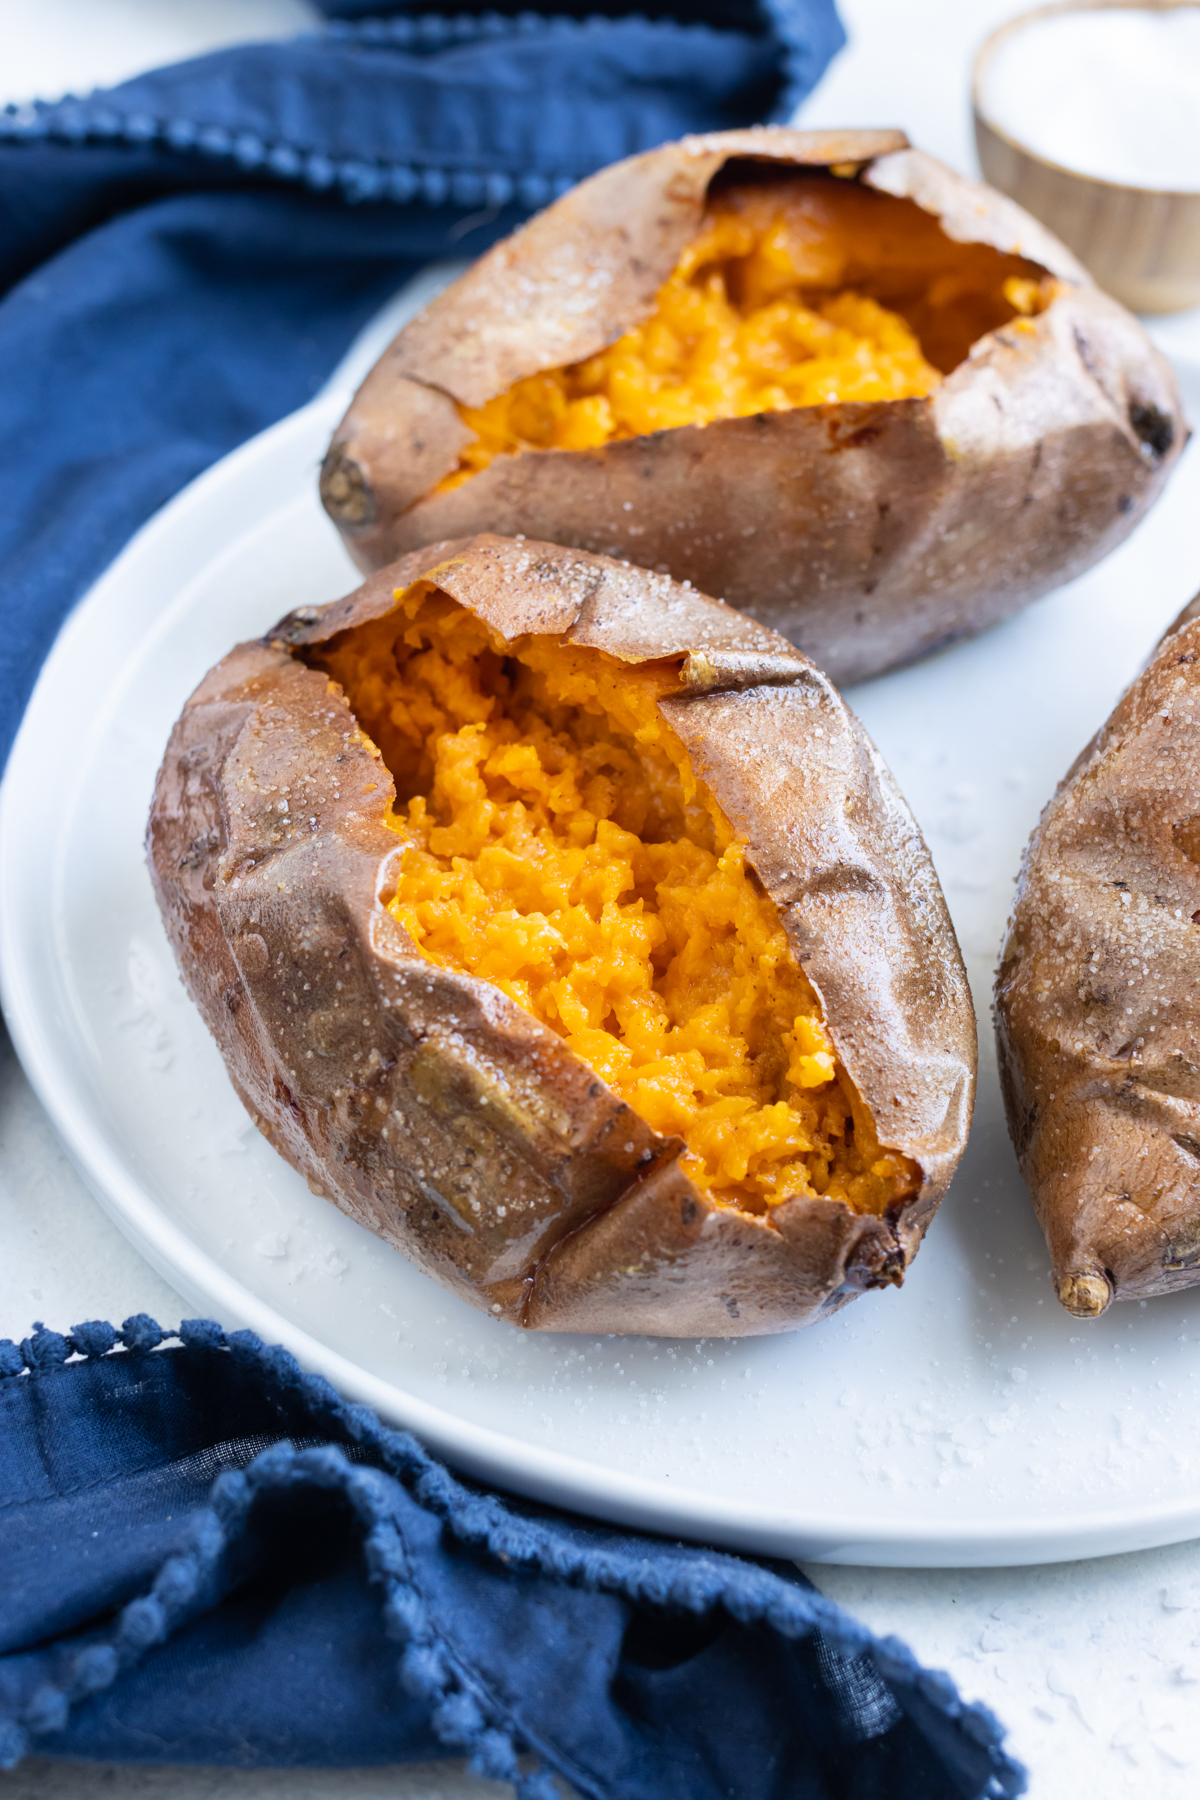 Air fried baked sweet potatoes are ready to be served as a side dish.